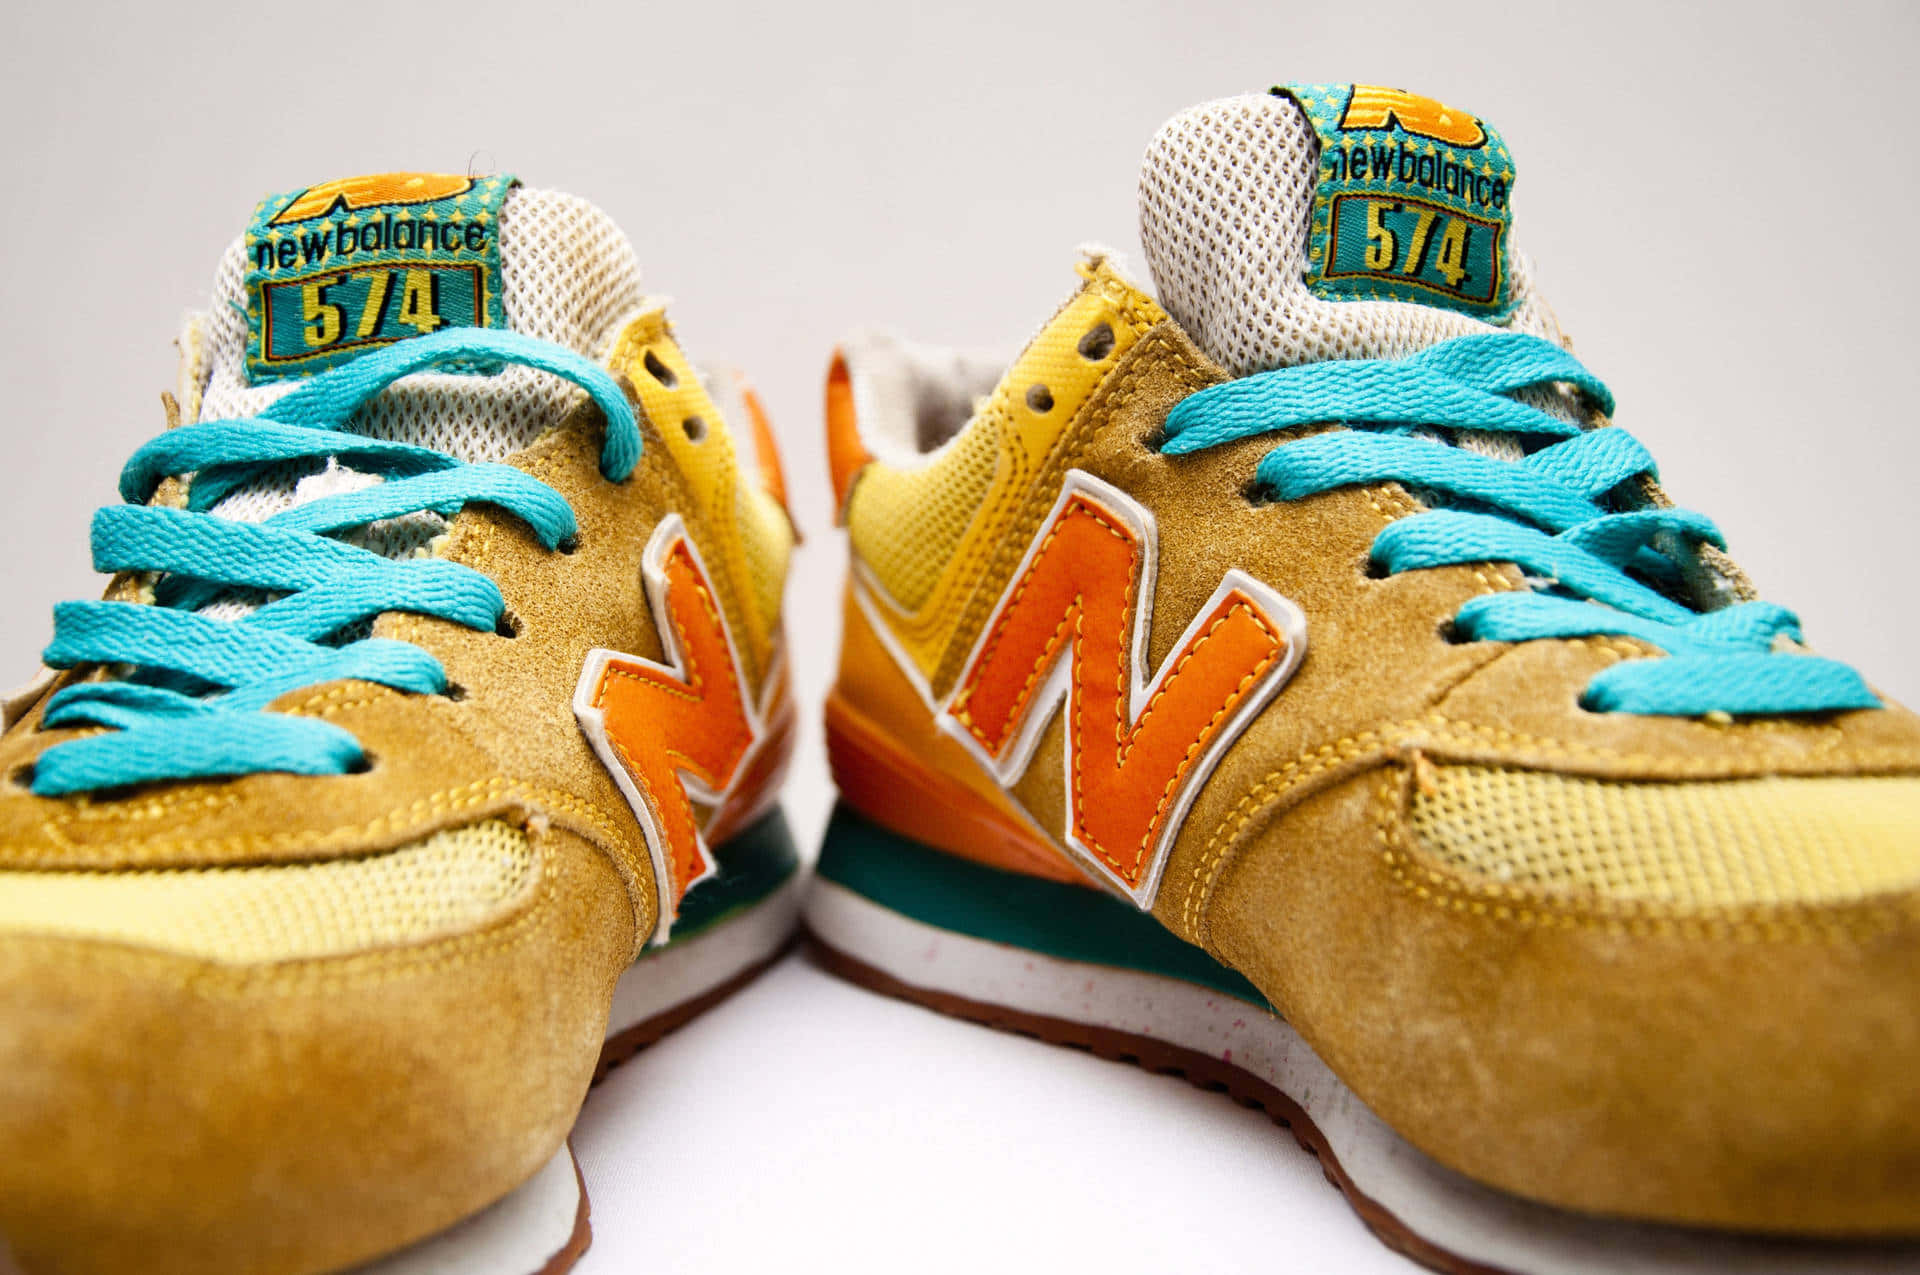 "Find your perfect balance with New Balance - lifestyle sneakers"